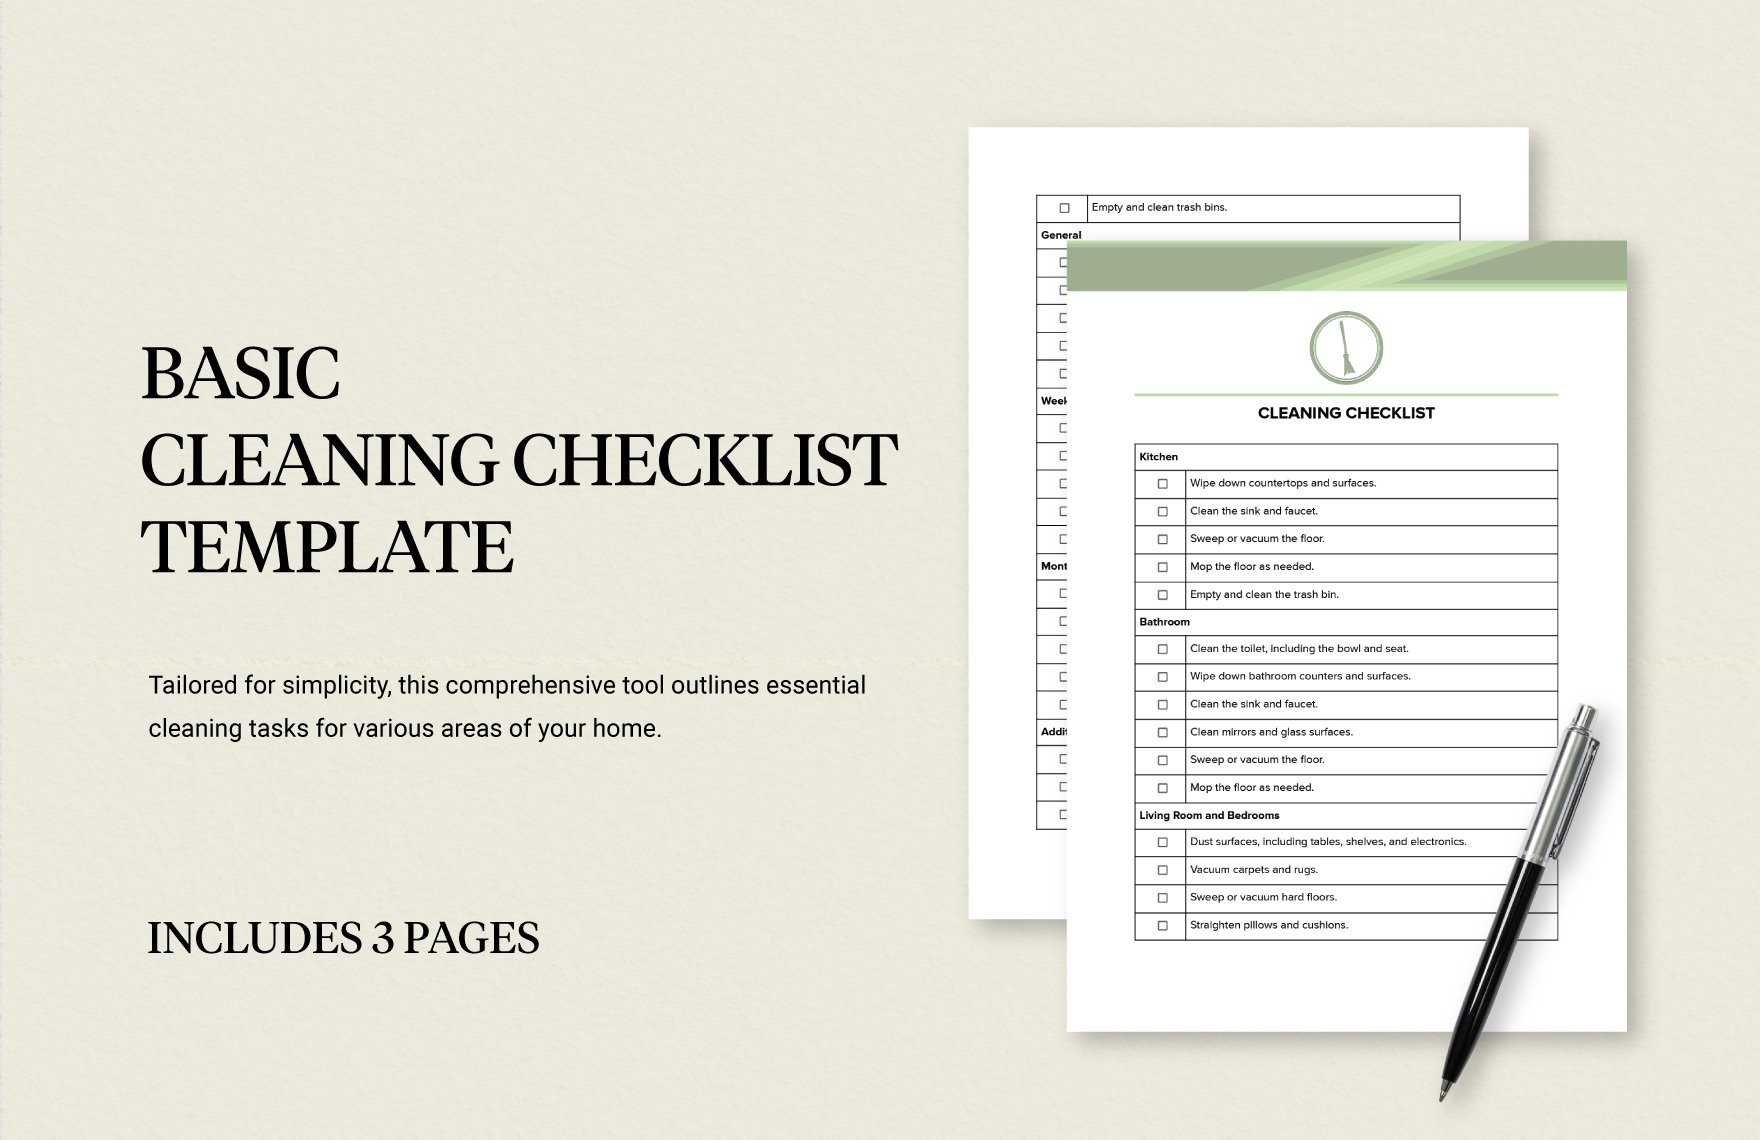 Basic Cleaning Checklist Template